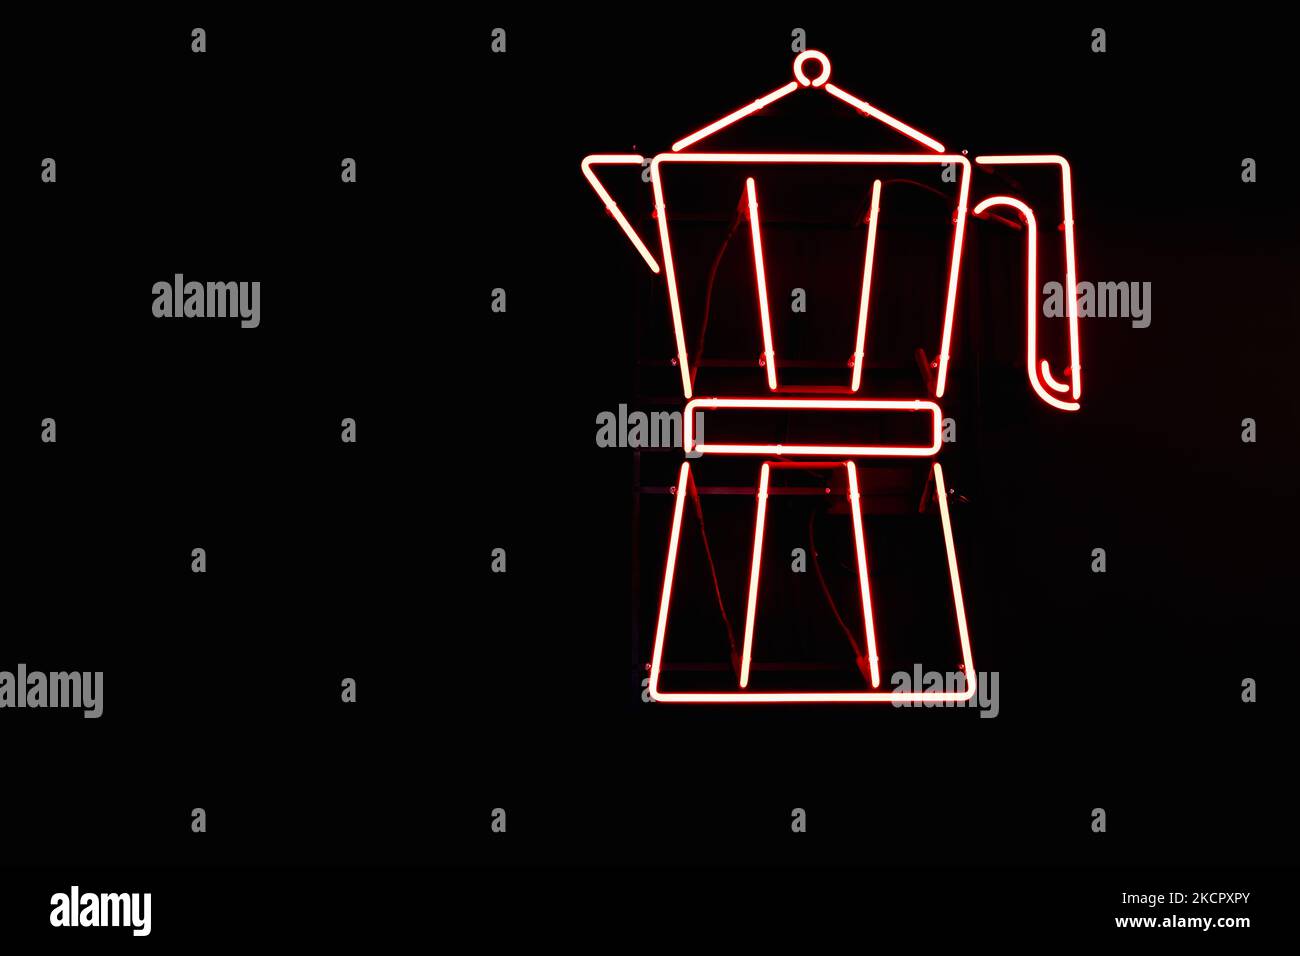 Red neon sign from lamps in the form of a Moka pot coffee maker on the wall of a black coffee shop. Stock Photo